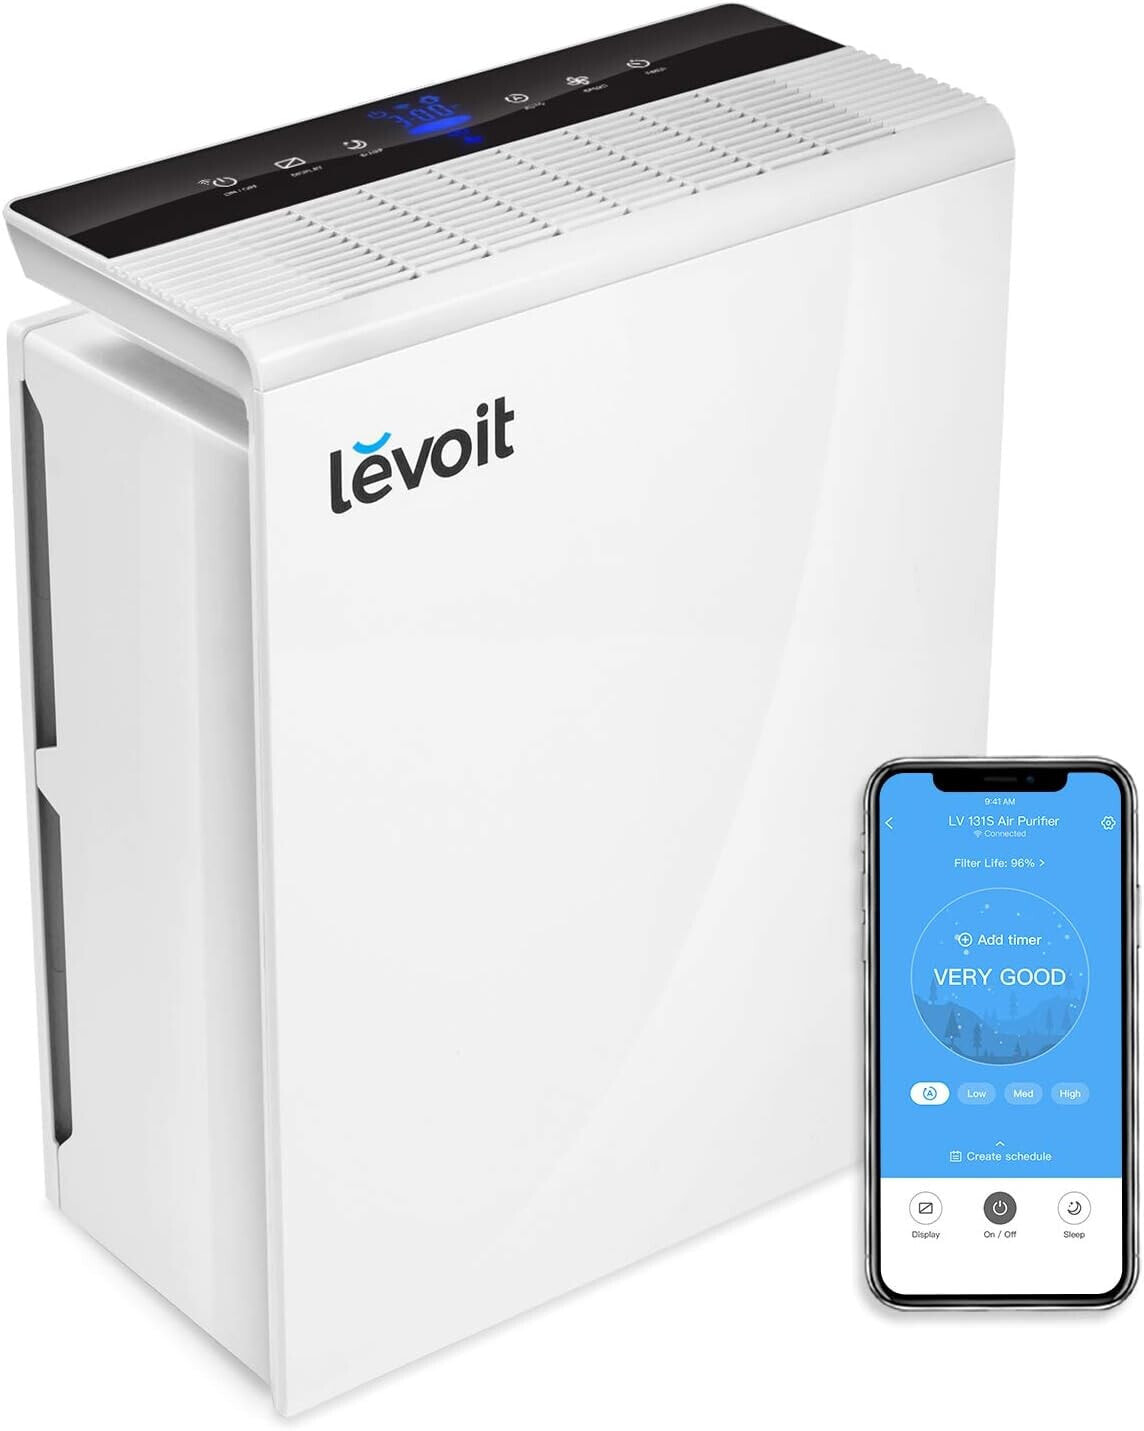 LEVOIT Air Purifier Allergy Sufferers with H13 HEPA Air Filter Against 99.97% of Mould Dust Pollen, Air Quality Feedback and Auto Mode, CADR 195m³/h for Smoking Room, Air Purifier 22dB Sleep Mode Timer